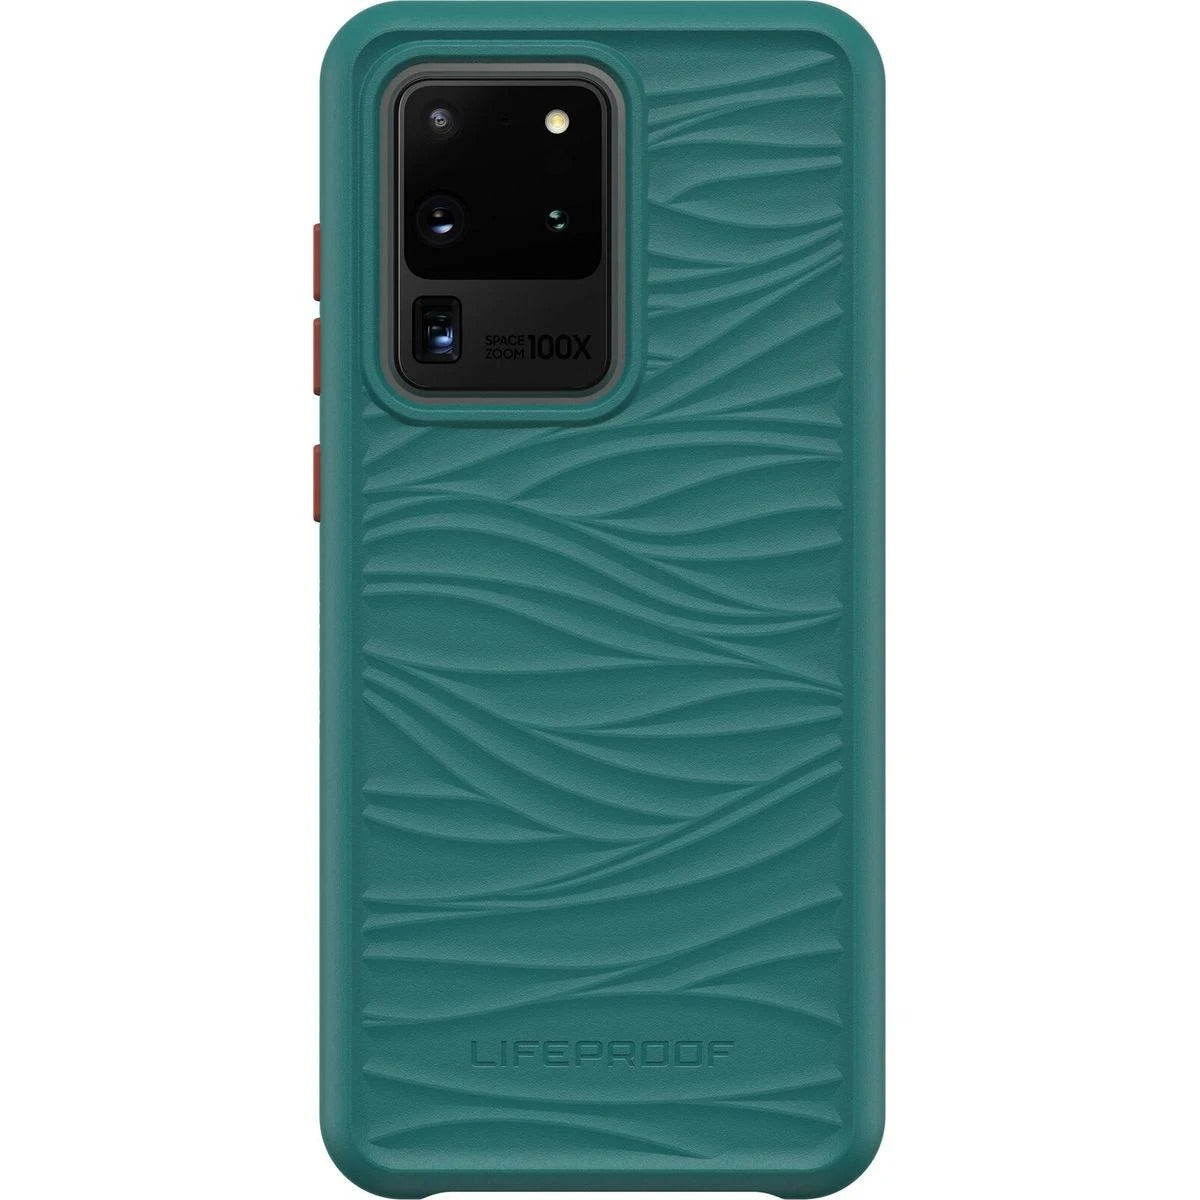 LifeProof WAKE SERIES Case for Galaxy S20 Ultra / S20 Ultra 5G - Down Under (Certified Refurbished)